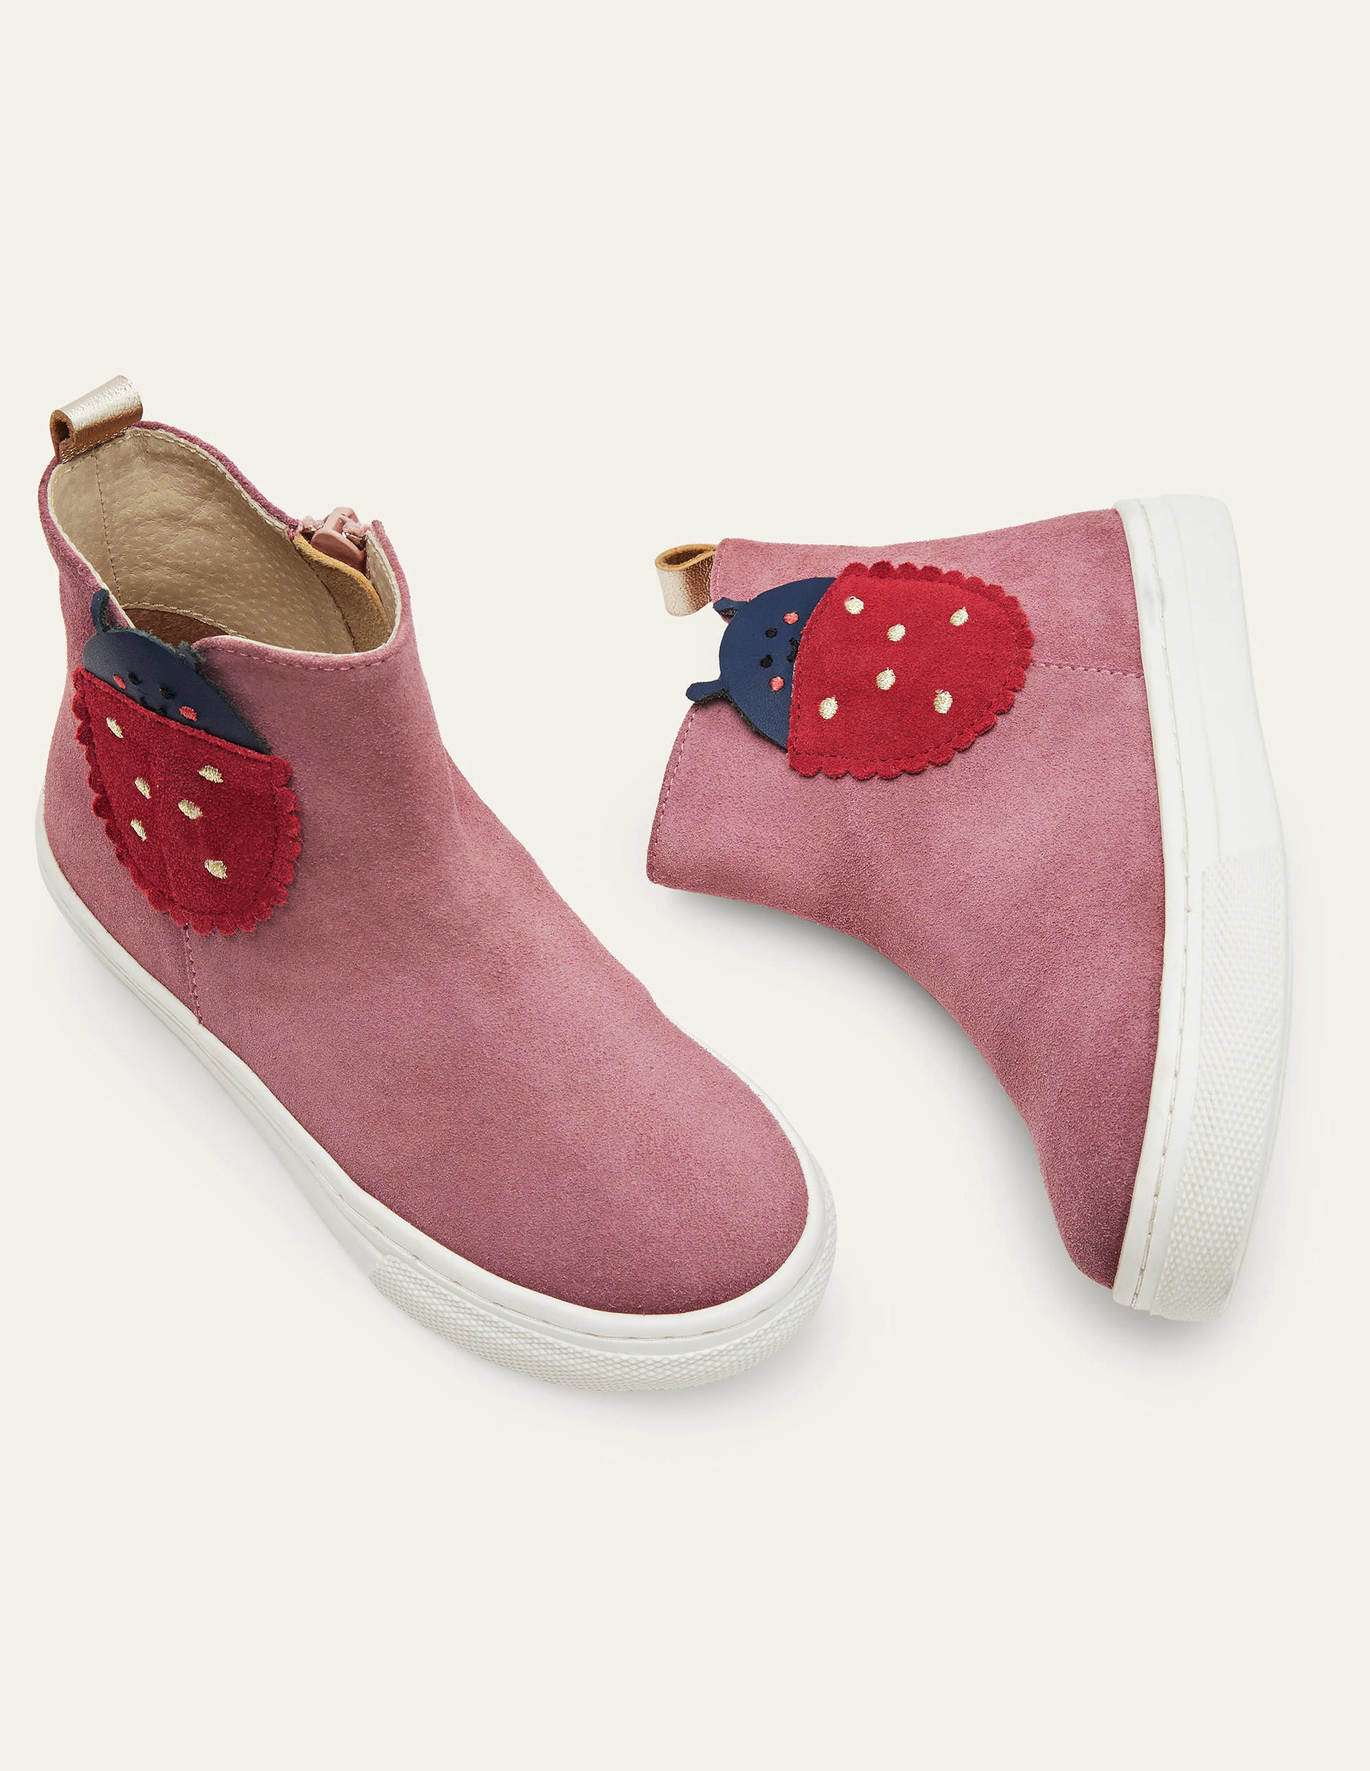 Boden Suede Novelty Boots - Bright Pink Ladybird